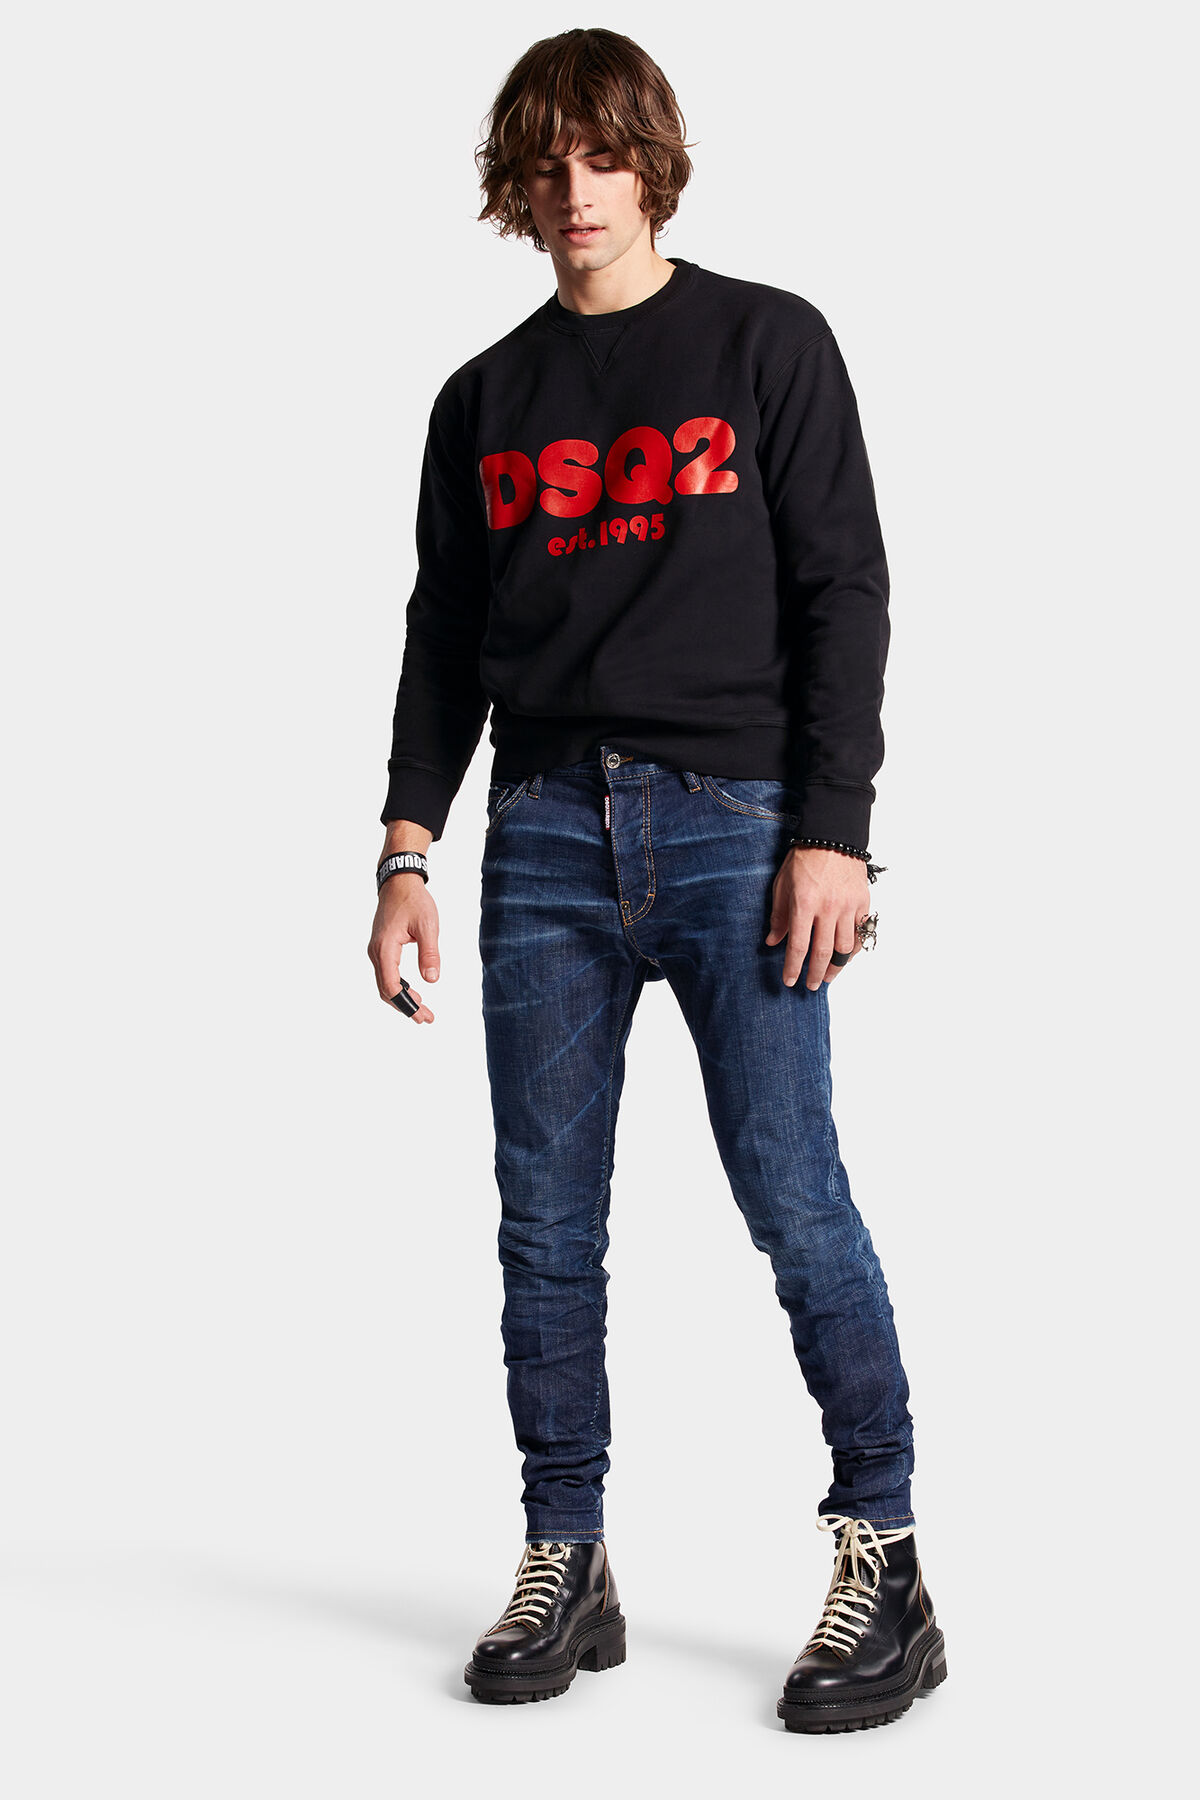 DSQUARED2 Jeans Cool Guy in Washed Dark Blue 54